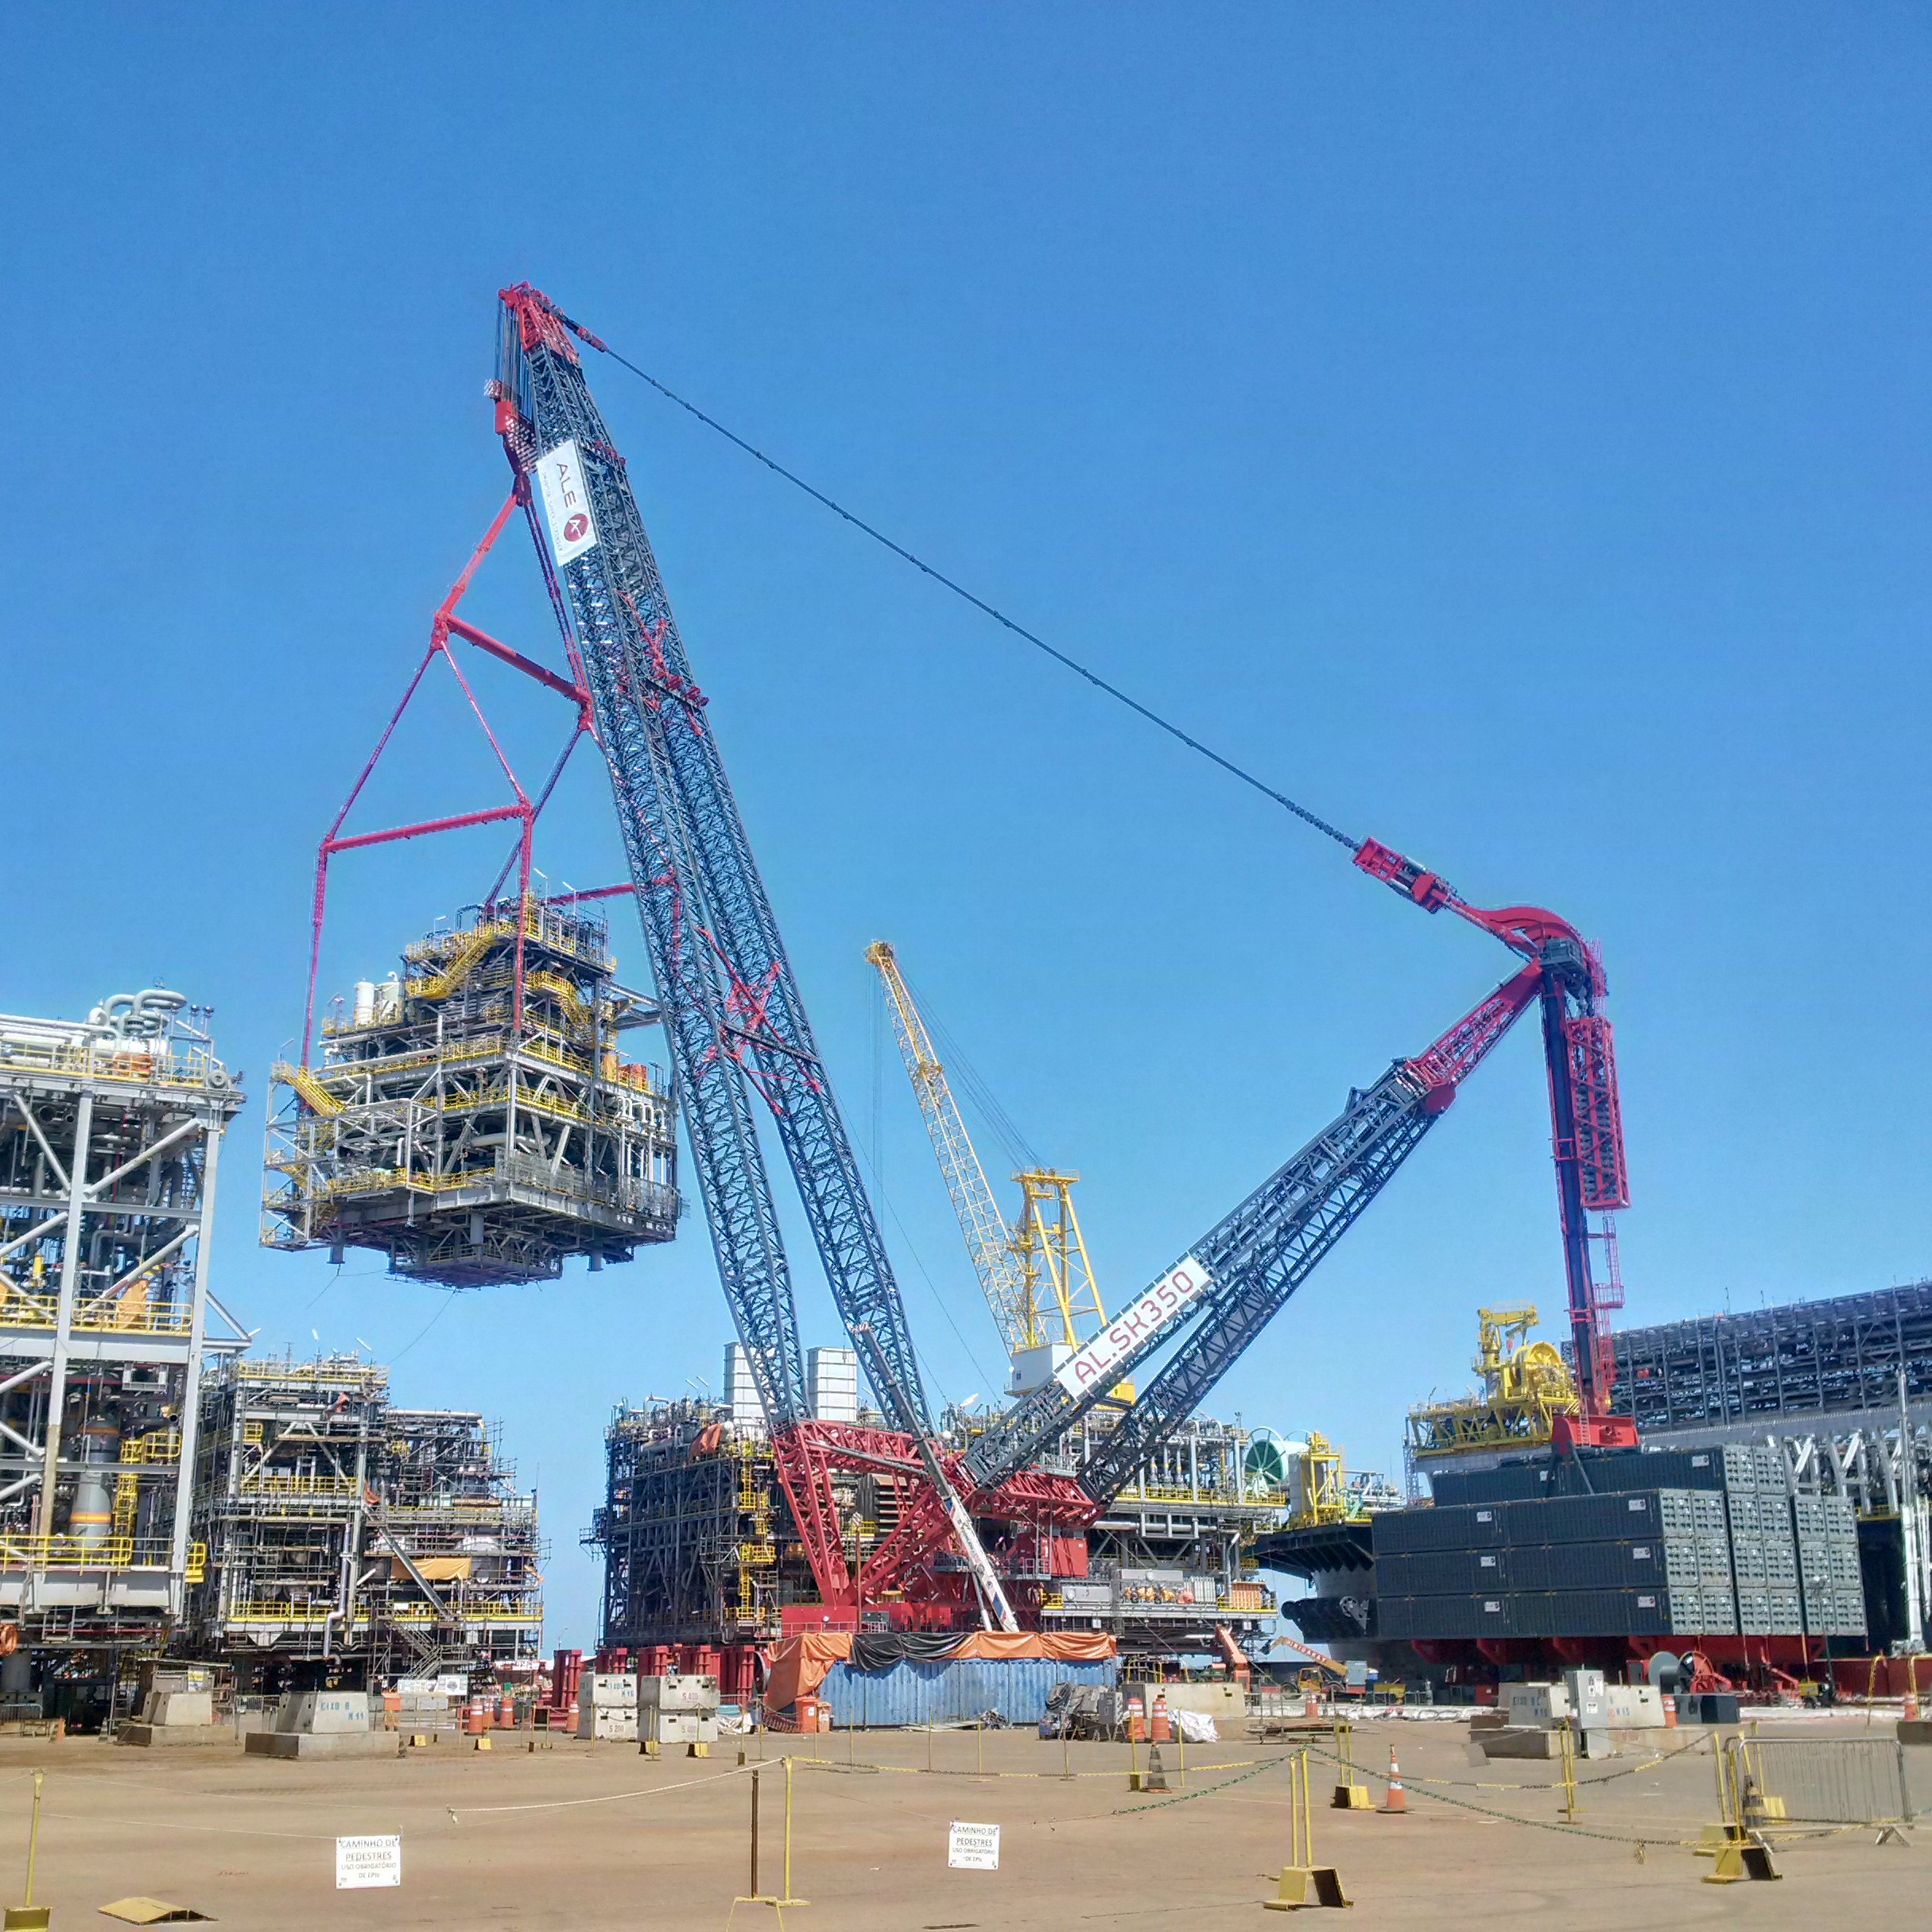 he world’s largest capacity land based crane, the AL.SK350, has performed its inaugural lifts in Brazil, using its 4,000t winch system and high speed slew.